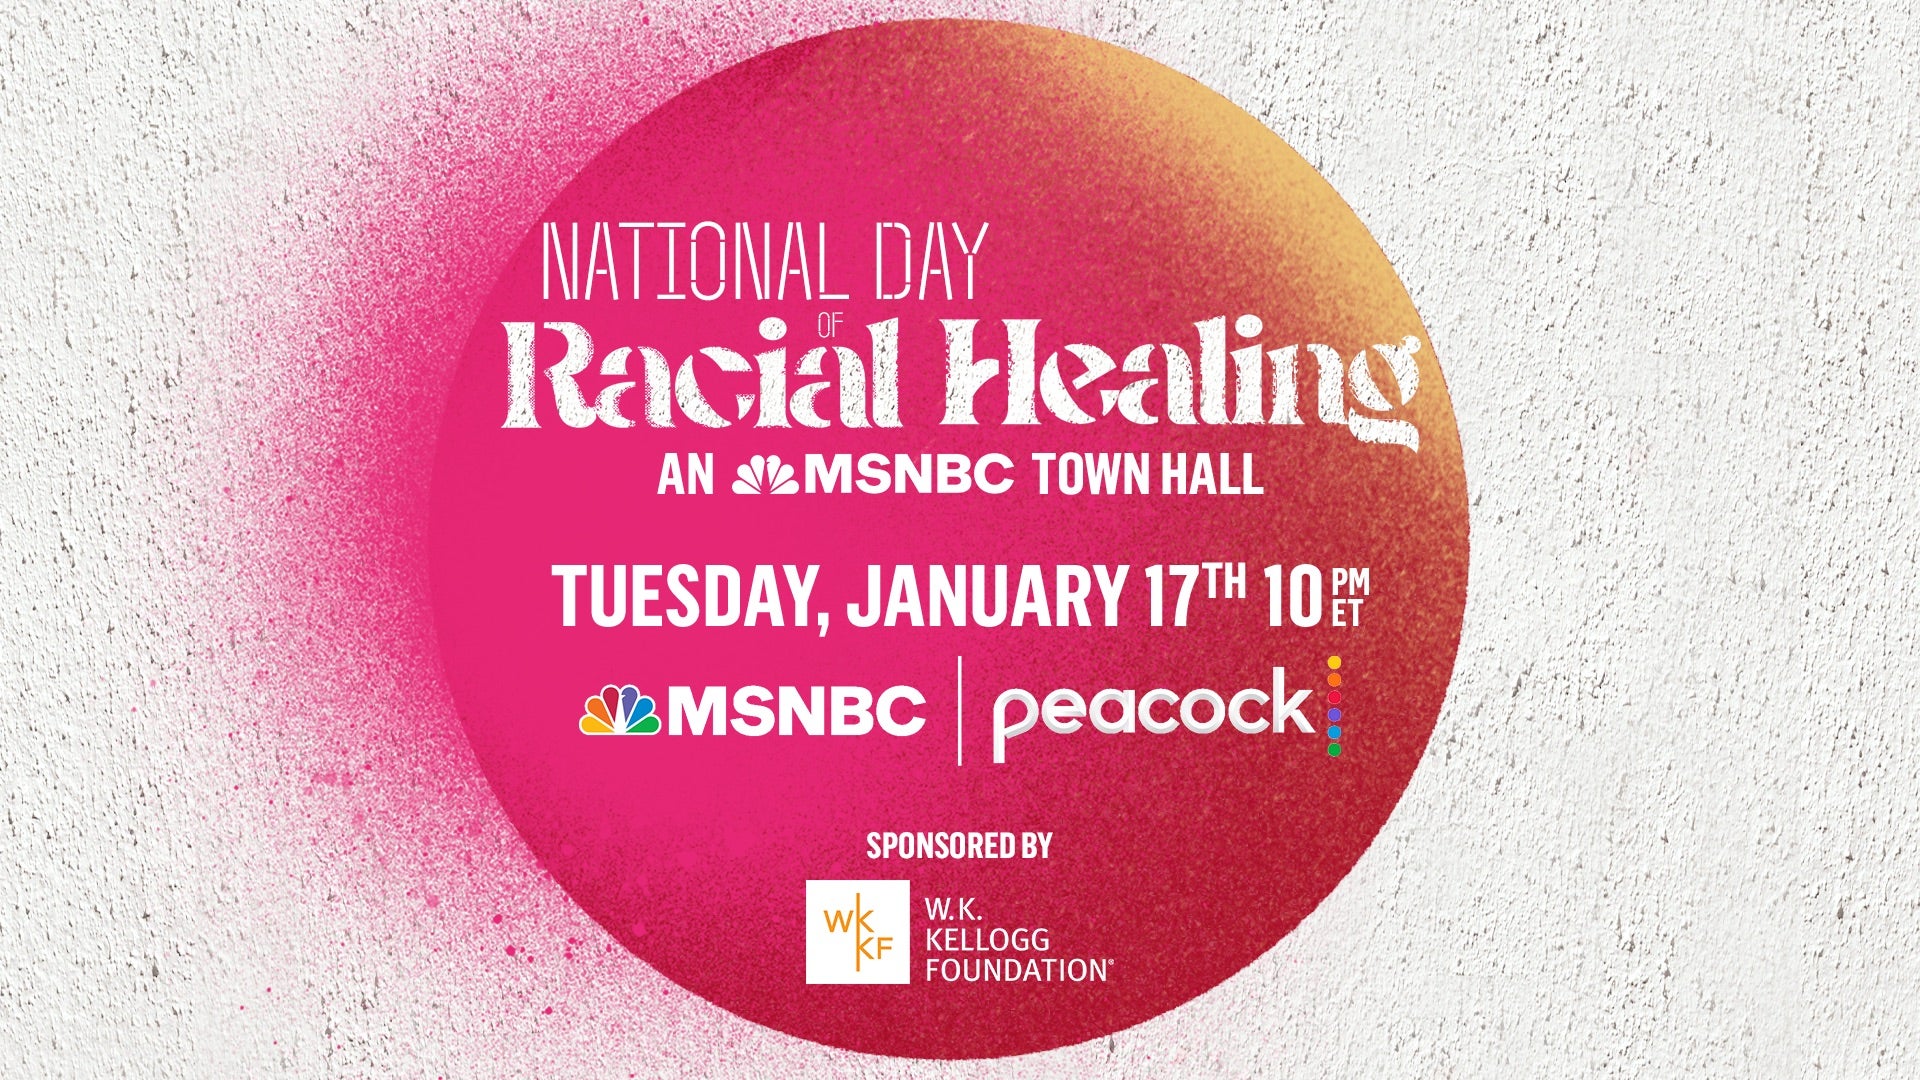 MSNBC Town Hall On Racial Healing Shows Why We Still Need To Talk About Racism